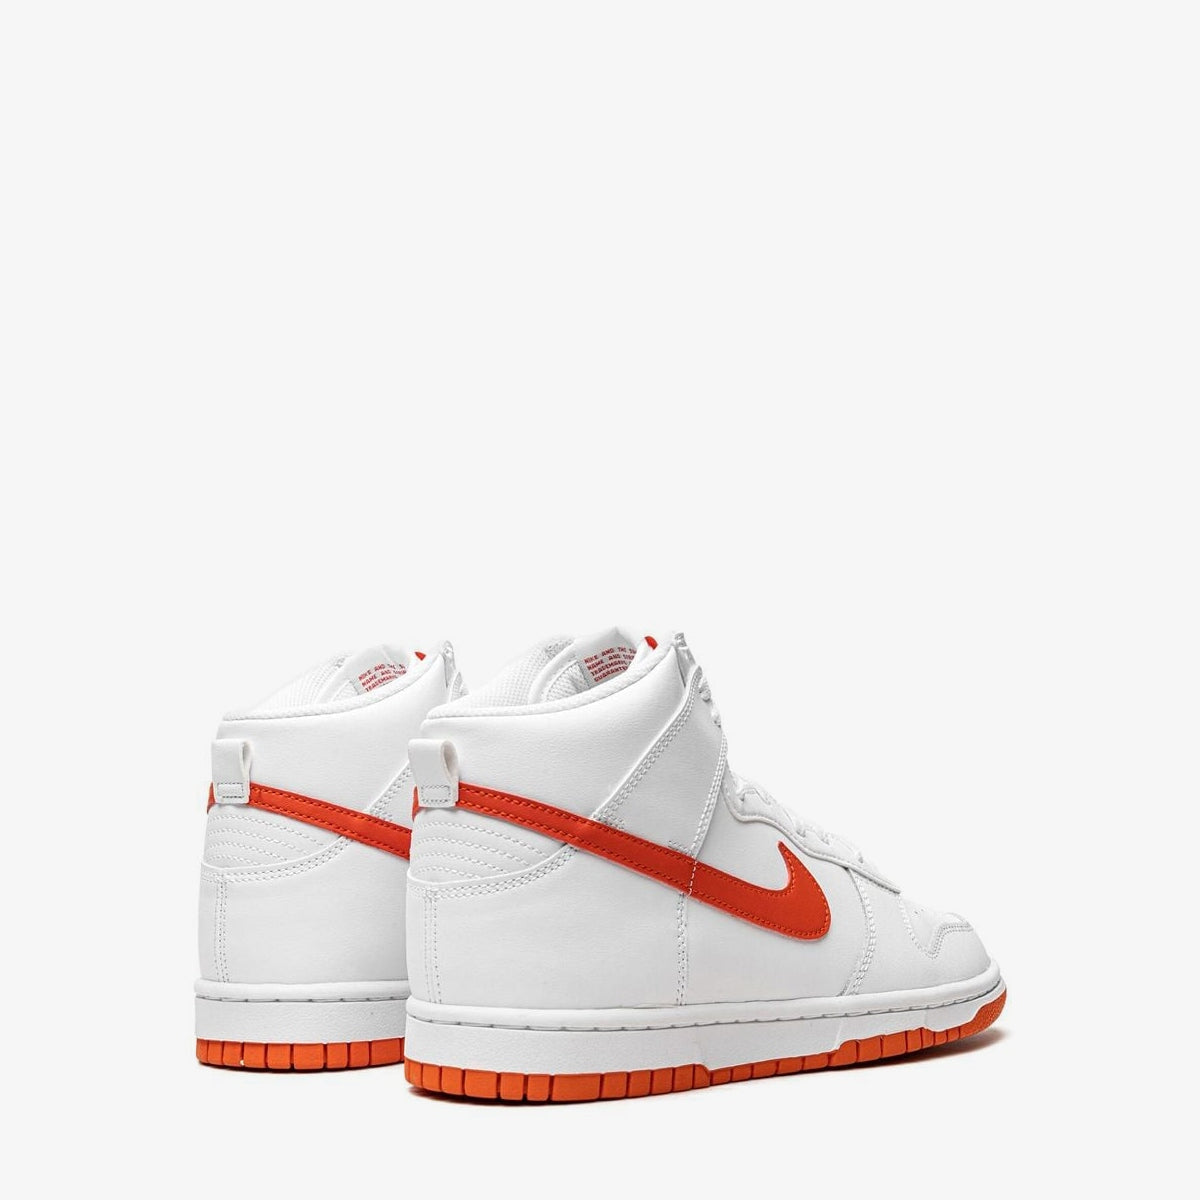 Nike Dunk High “Picante Red” Sneakers Nike